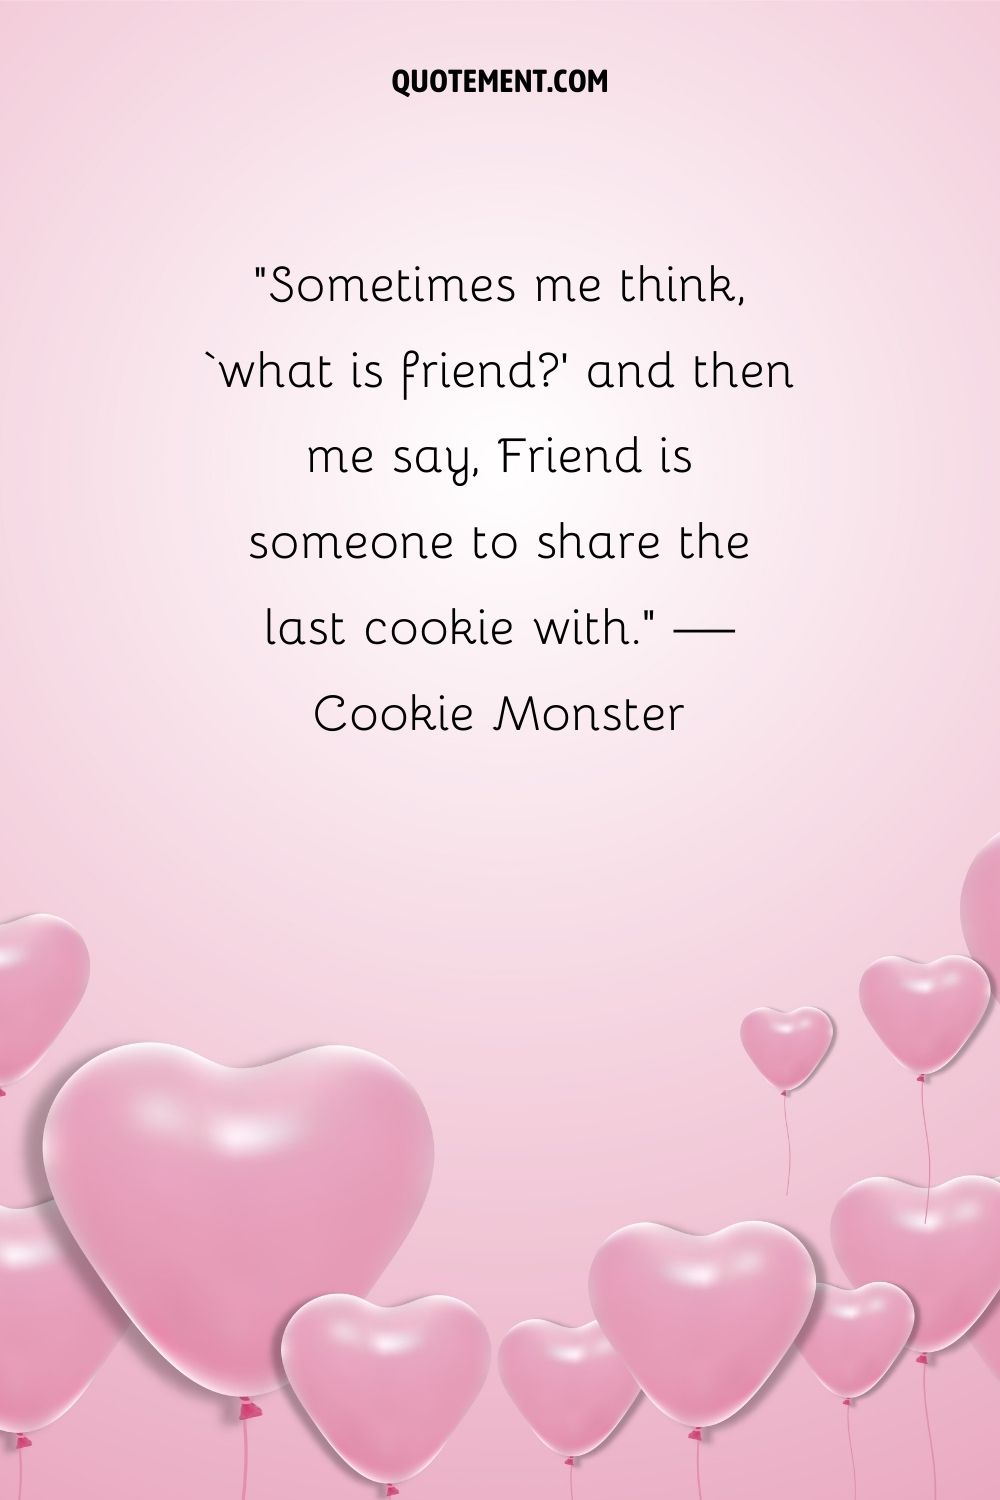 Hearts in gentle harmony representing cookie monster quote.